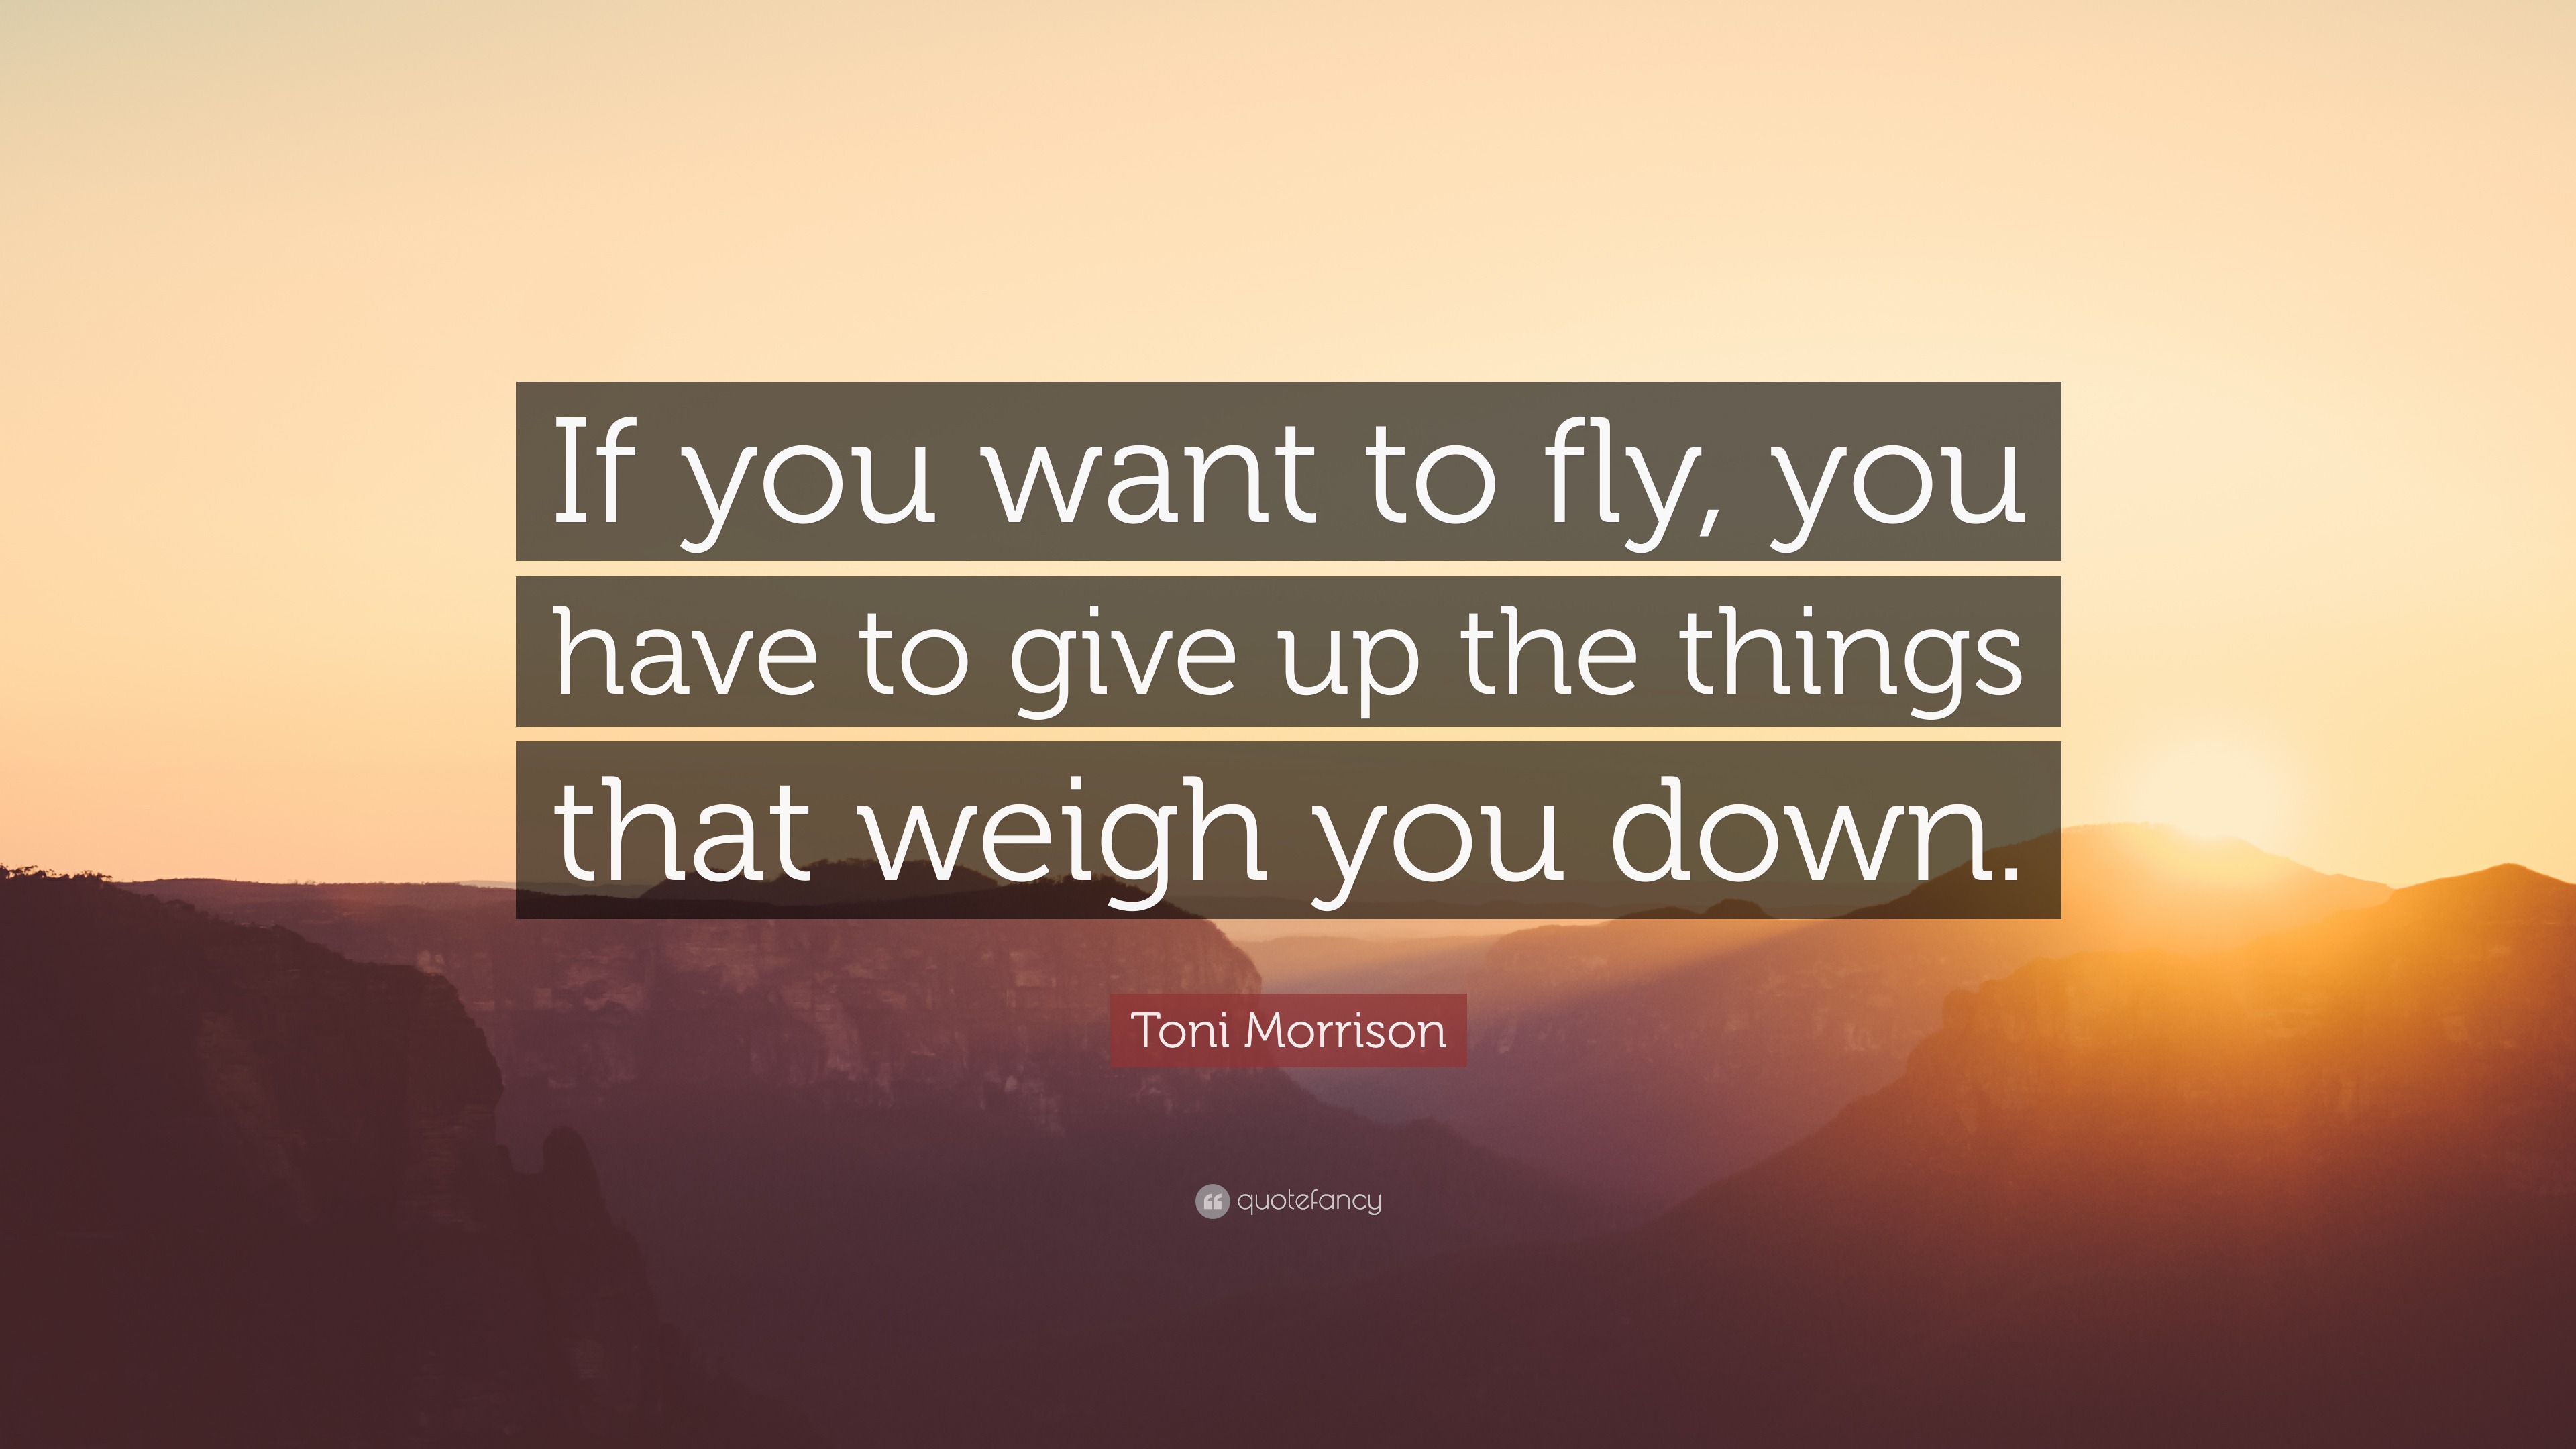 Toni Morrison Quote: “If you want to fly, you have to give up the ...